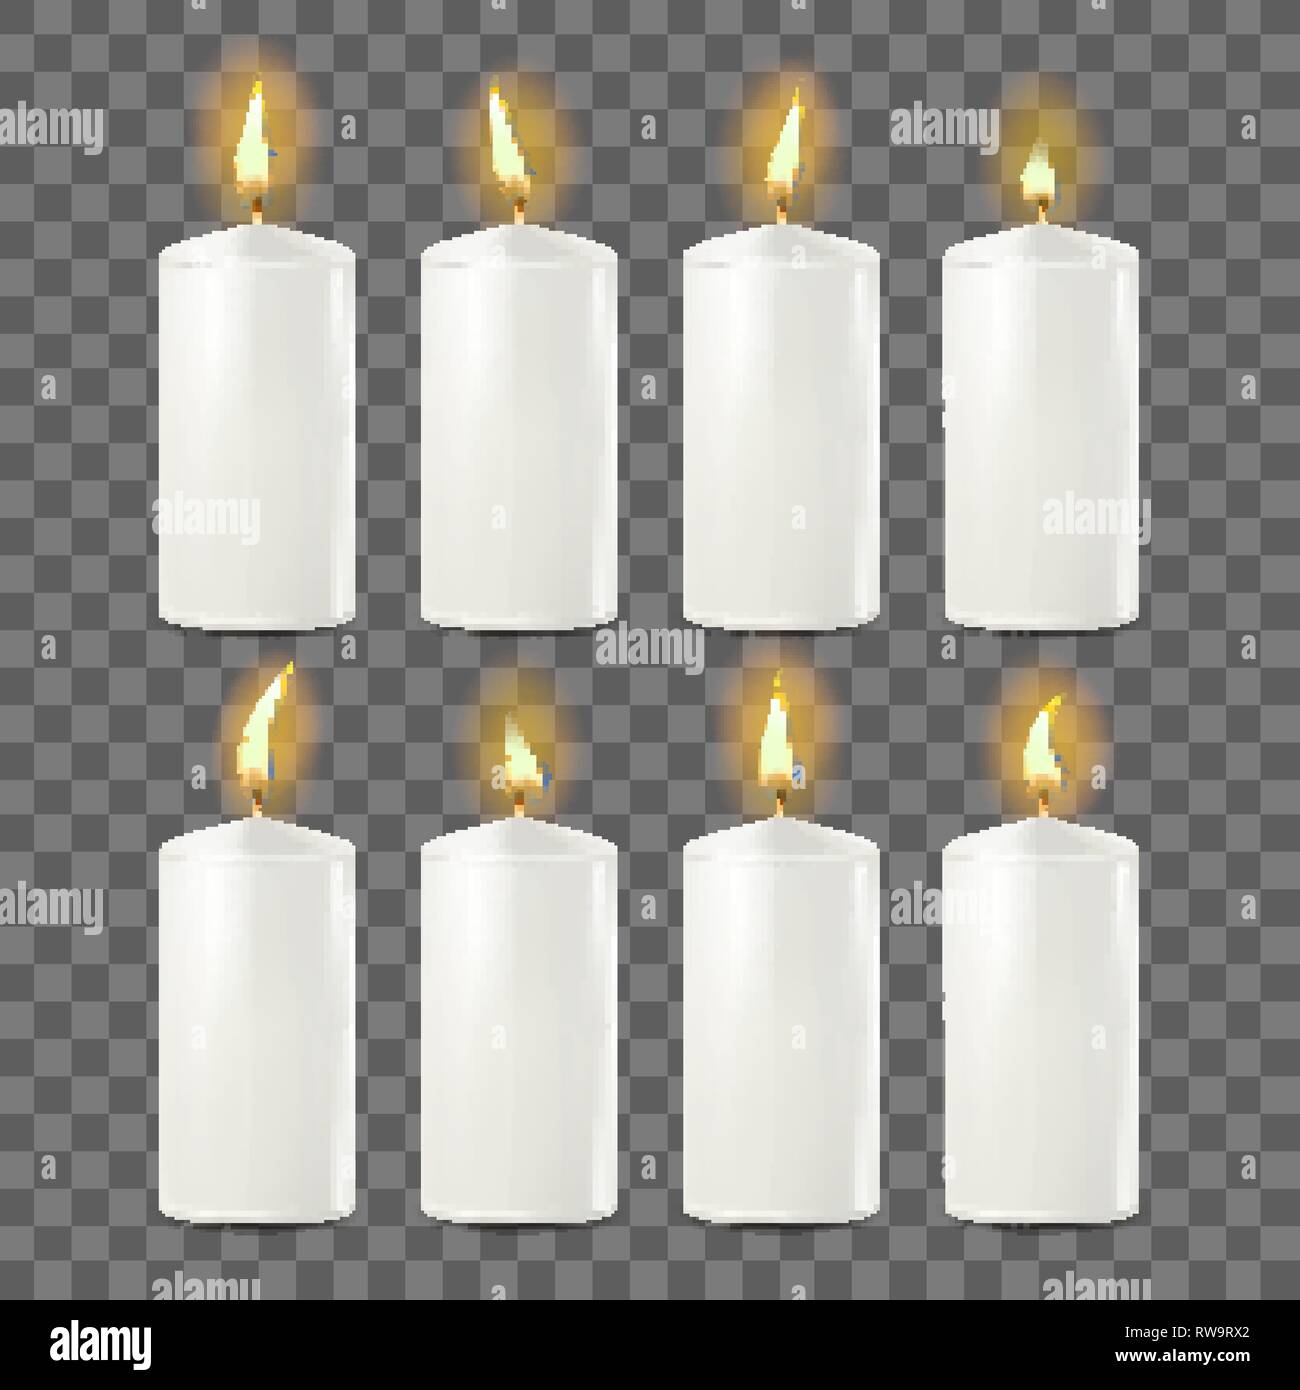 49 Mini Glass Candle Jars Images, Stock Photos, 3D objects, & Vectors